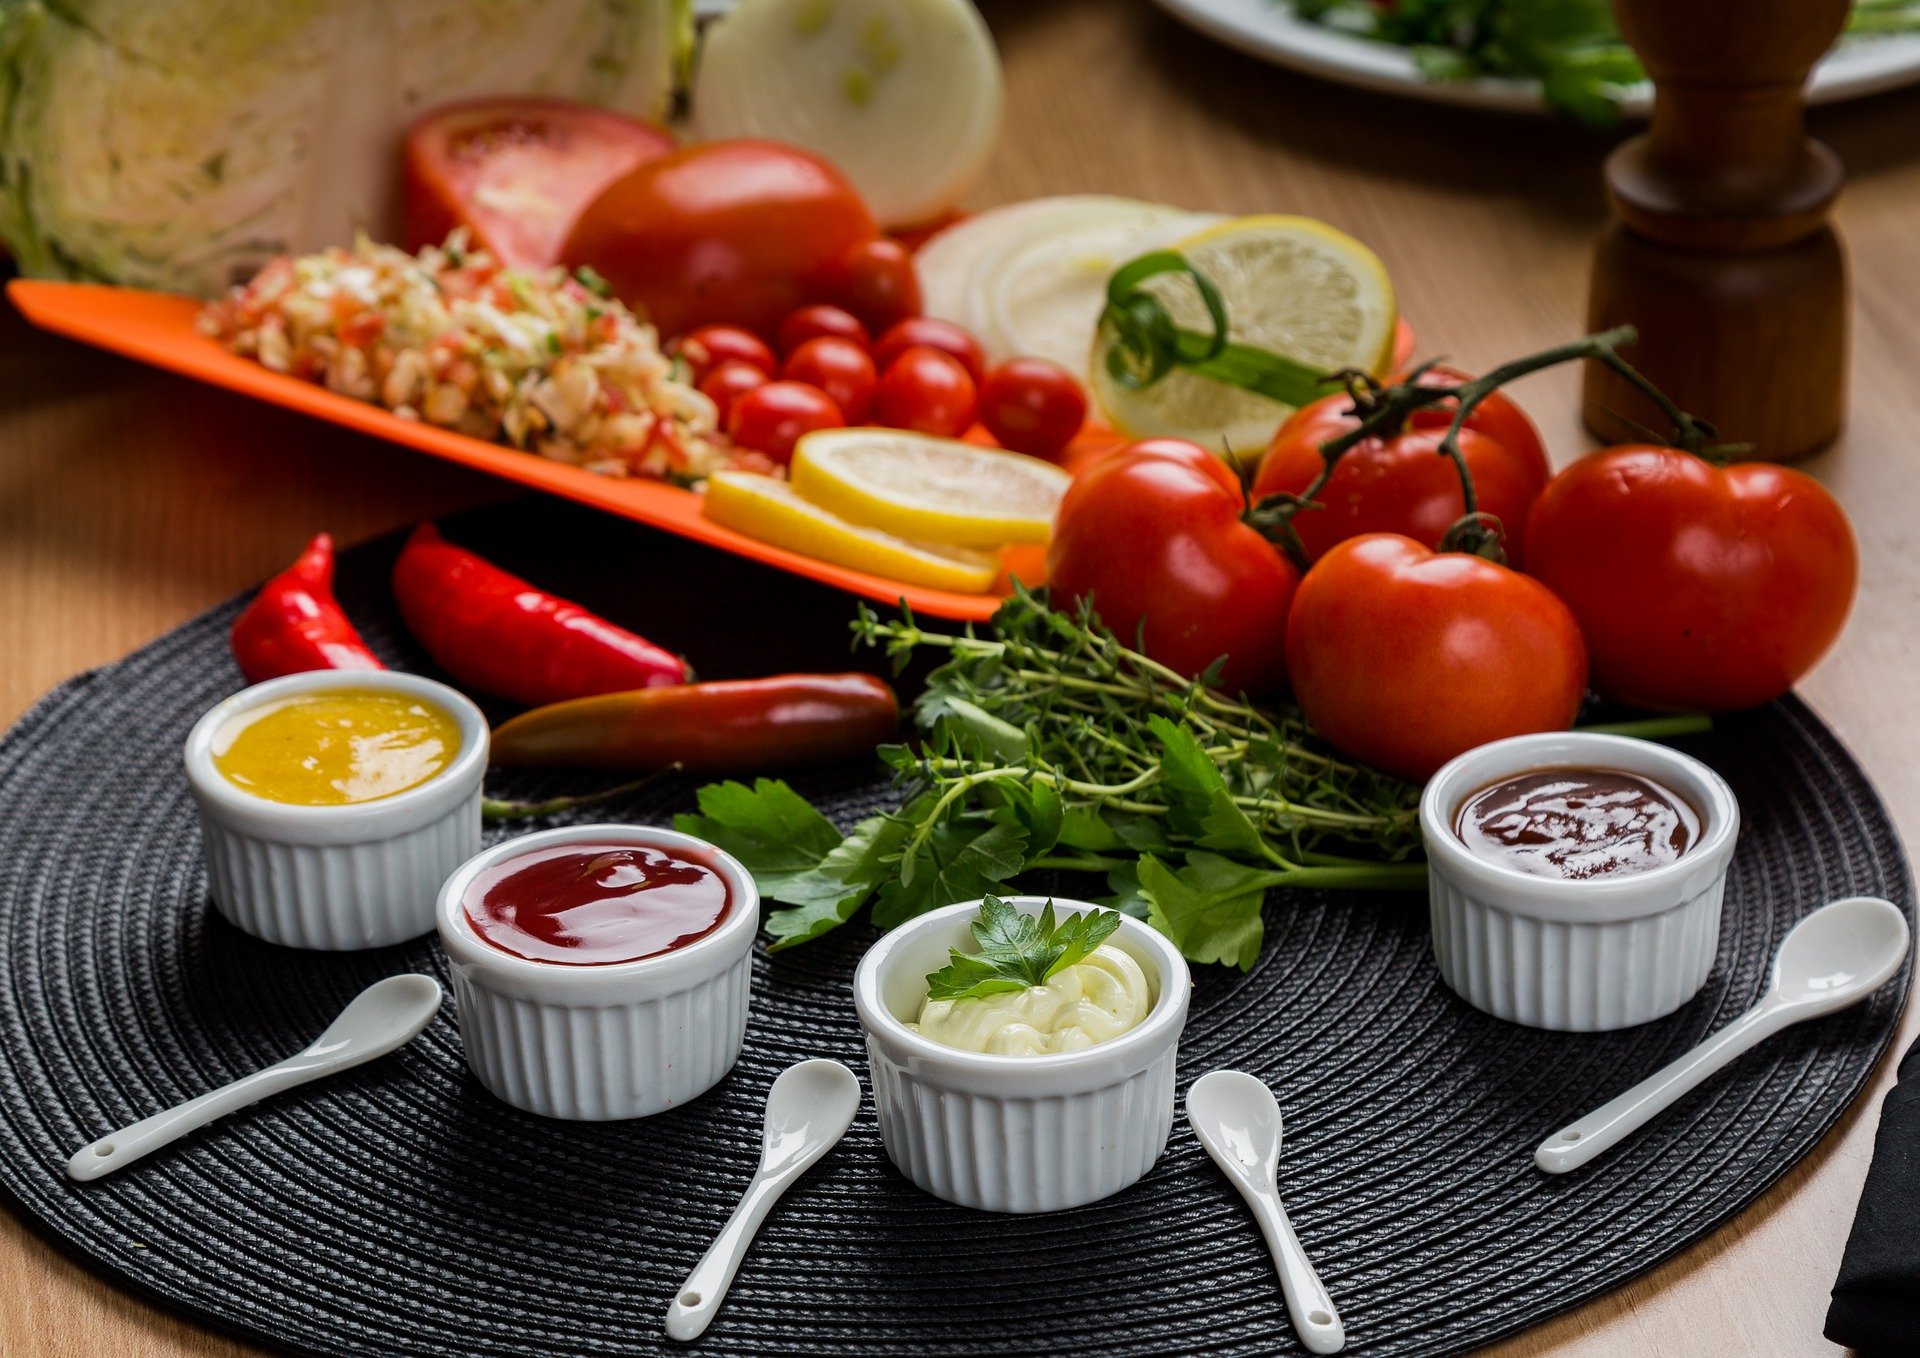 Condiments - Allergens and ingredients